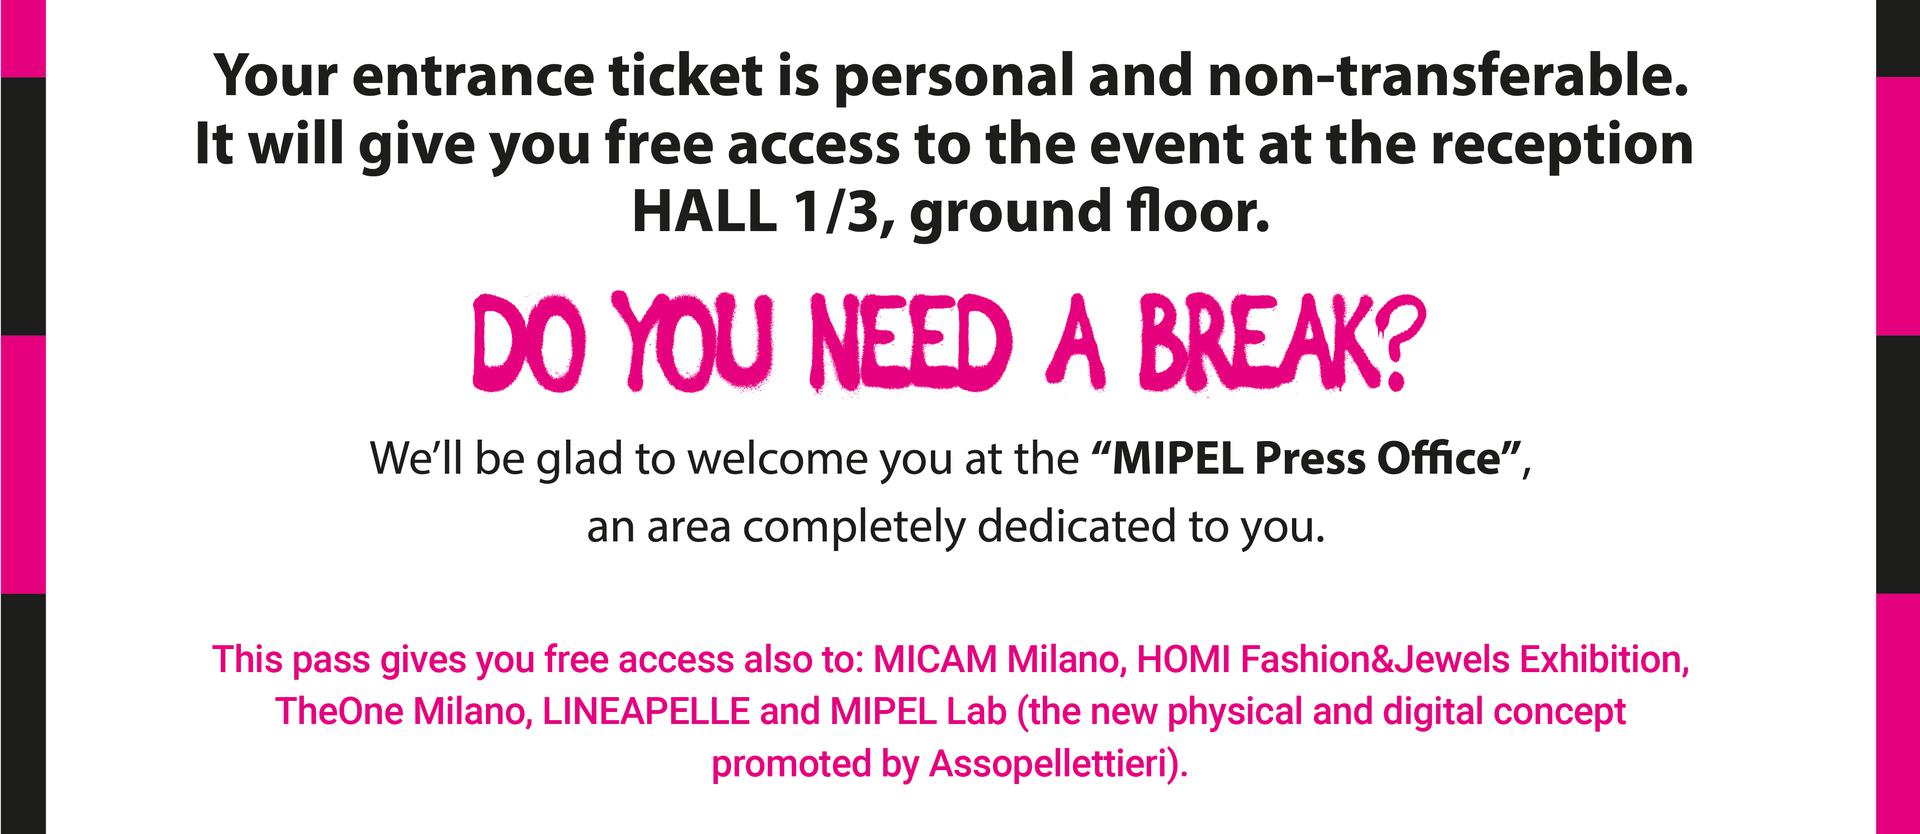 Your entrance ticket is personal and non-transferable.  DO YOU NEED A BREAK? We'll be glad to welcome you at the ''MIPEL Press Office'', an area completely dedicated to you. 